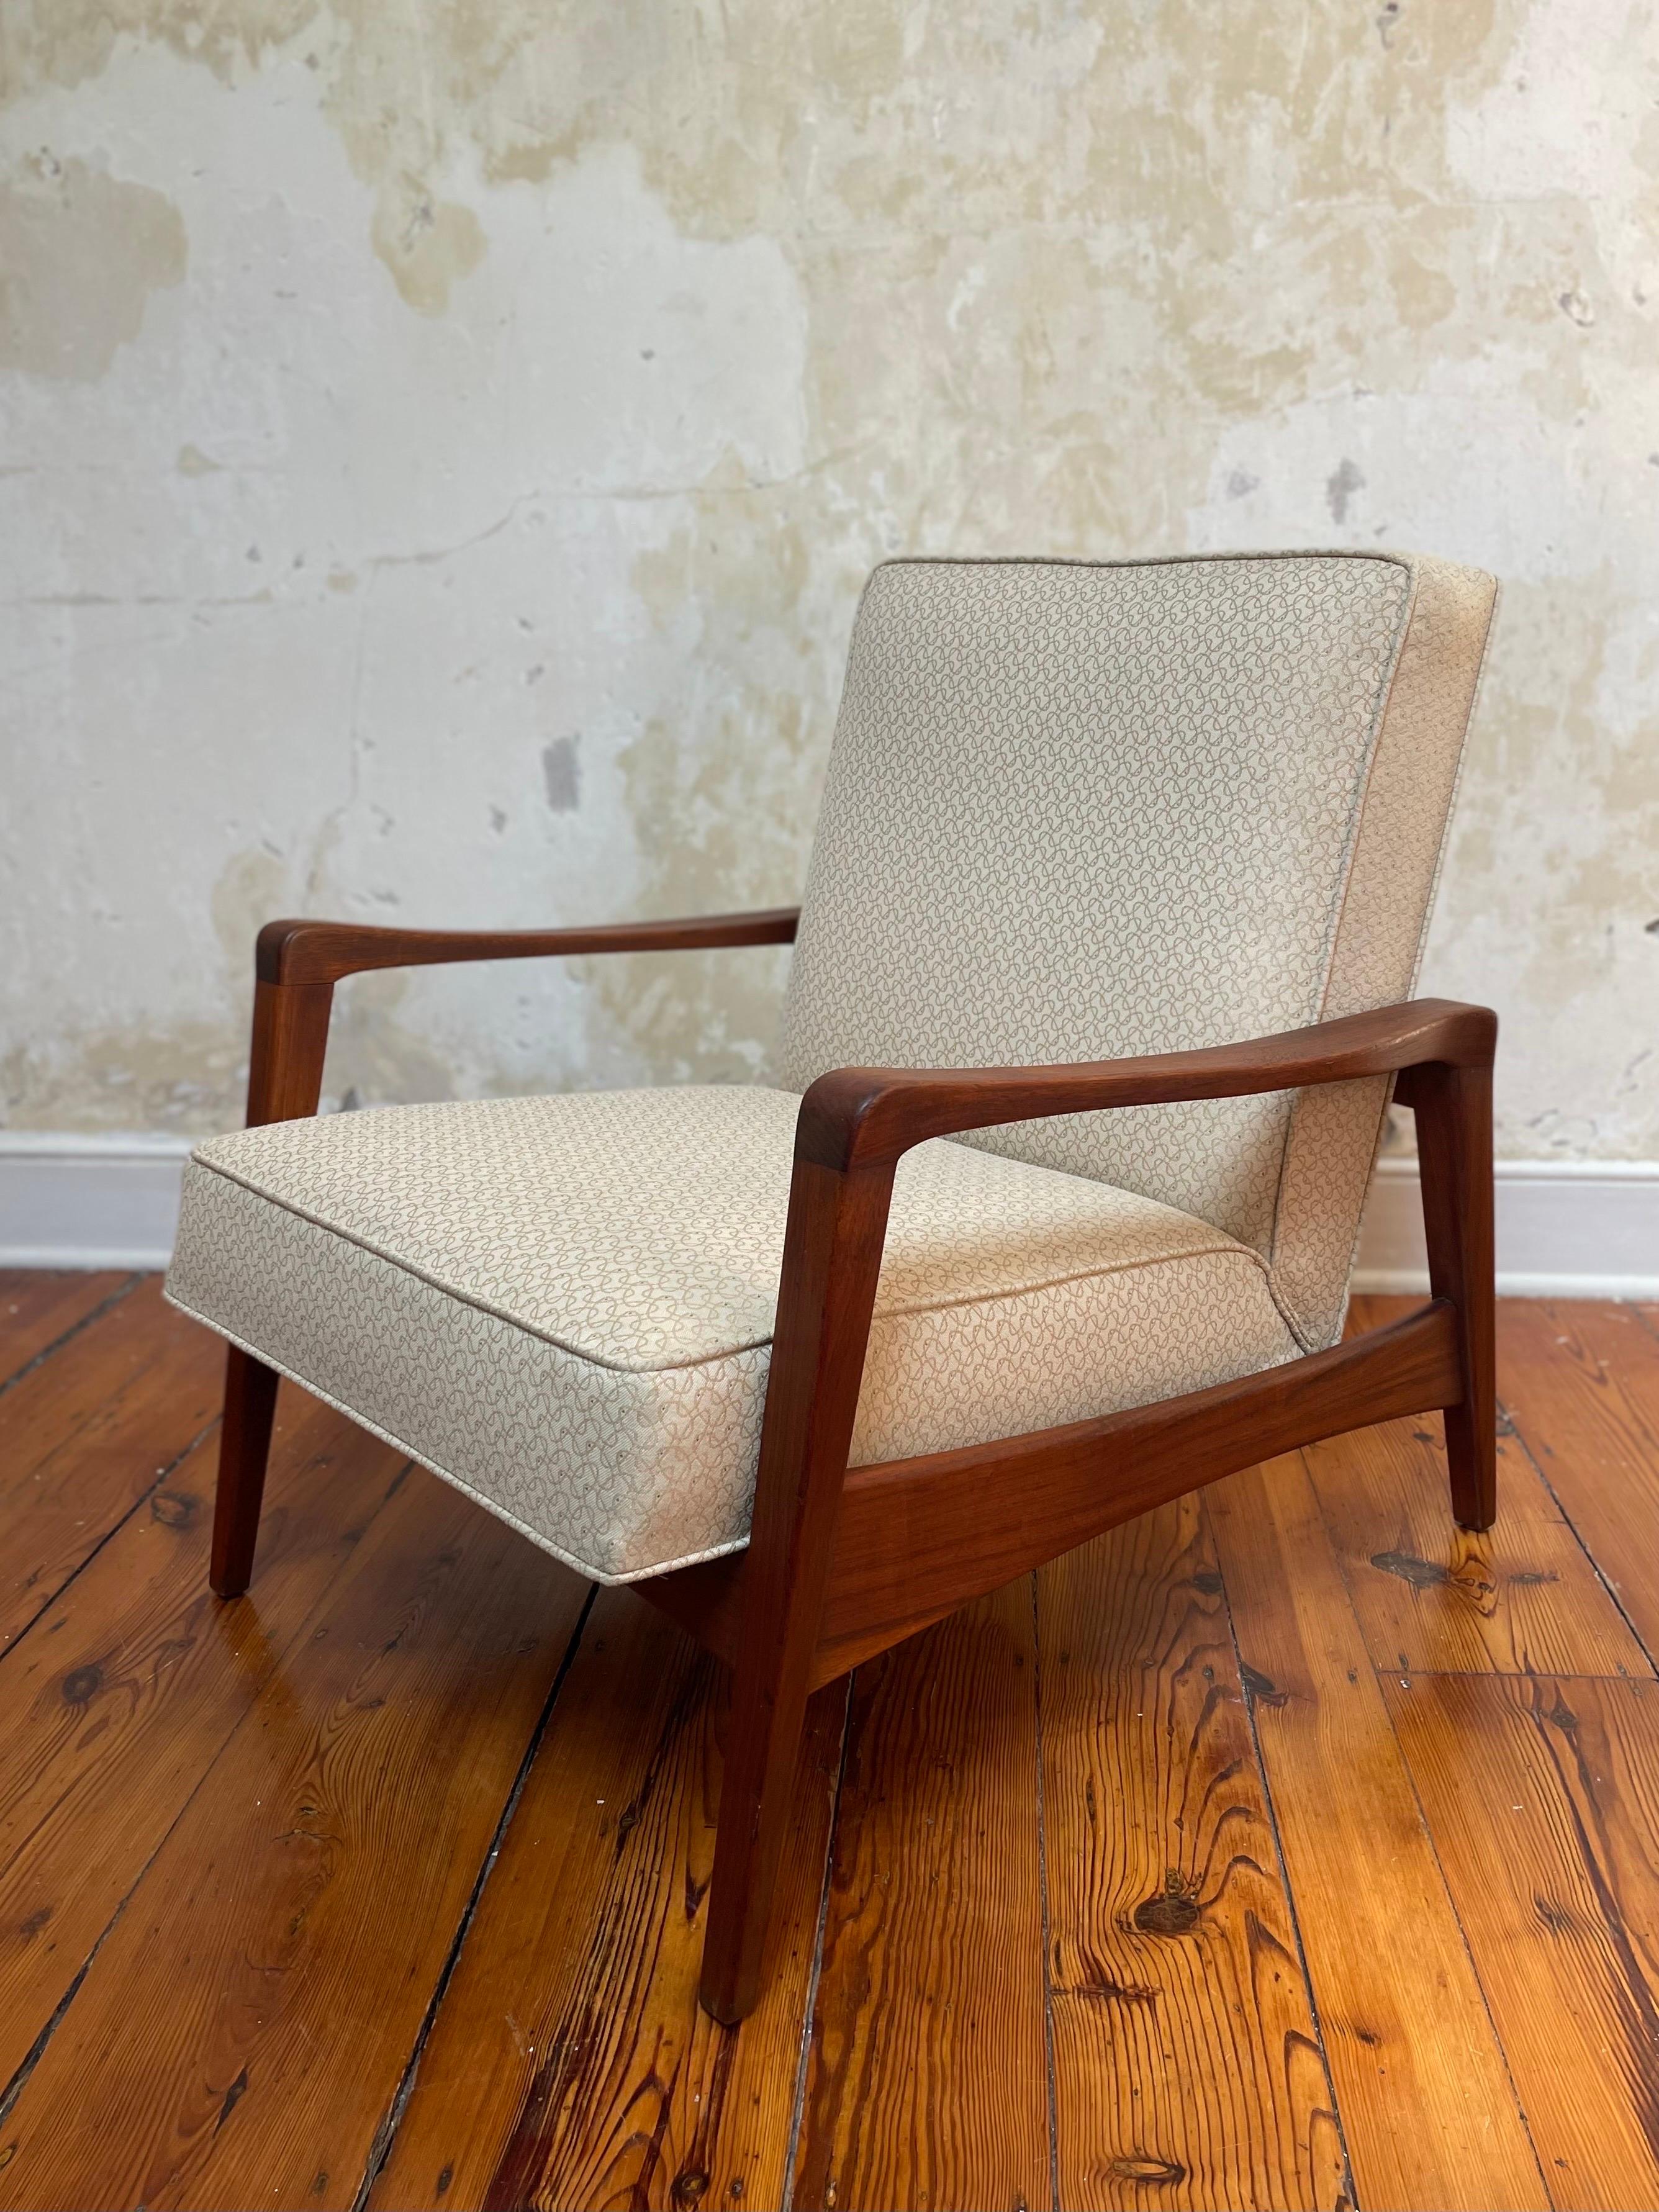 An uncommon (unmarked) model 5476 lounge chair in walnut, designed by George Nelson for Herman Miller. As pictured in the 1955-56 trade catalog in the Grand Rapids Public Museum digital archives. Fabric is a pale yellow/ivory color with a subtle